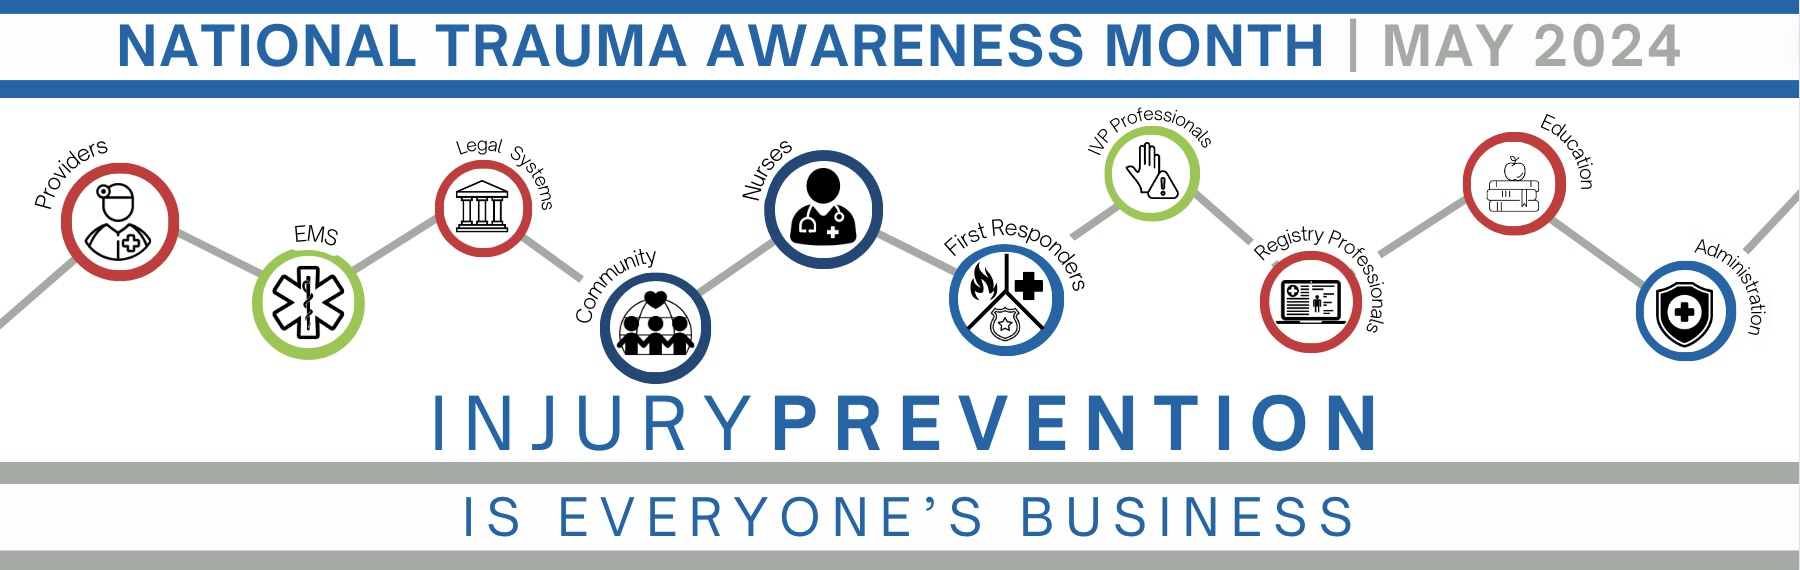 The Maryland Committee on Trauma (MDCOT) recognizes May as National Trauma Awareness Month. This is an annual campaign dedicated to promoting injury prevention and safety practices. With trauma-related injuries occurring in Maryland and nationwide, the theme "Trauma Is Everyone's Business" is timely and fitting for our trauma centers to advocate. This month-long initiative engages individuals, communities, and organizations in efforts to reduce the incidence of injuries and mitigate their impact. Raising awareness and supporting prevention efforts is crucial. Prevention efforts include utilizing existing injury and violence prevention programs and sharing successful partnerships in the delivery of injury and violence prevention programs. Maryland's trauma and EMS system is focused on injury and trauma prevention. Together we can all work towards eliminating unintentional injury and trauma in Maryland!